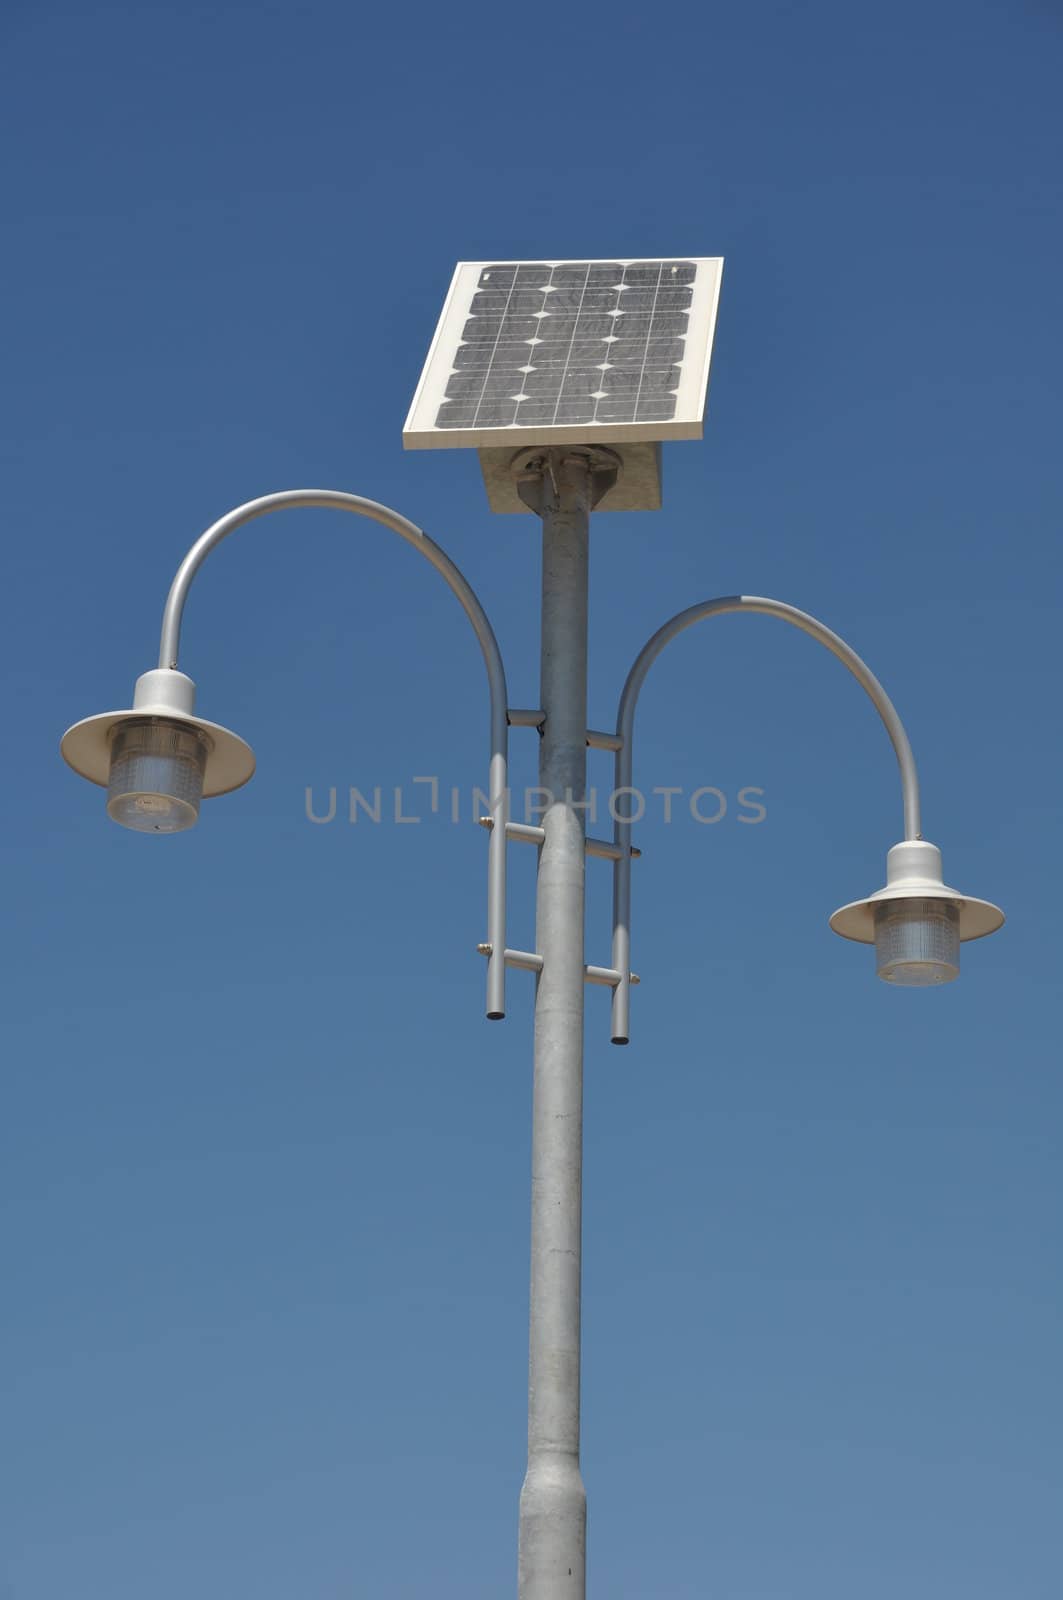 street lamp post with solar panel energy (against blue sky background)